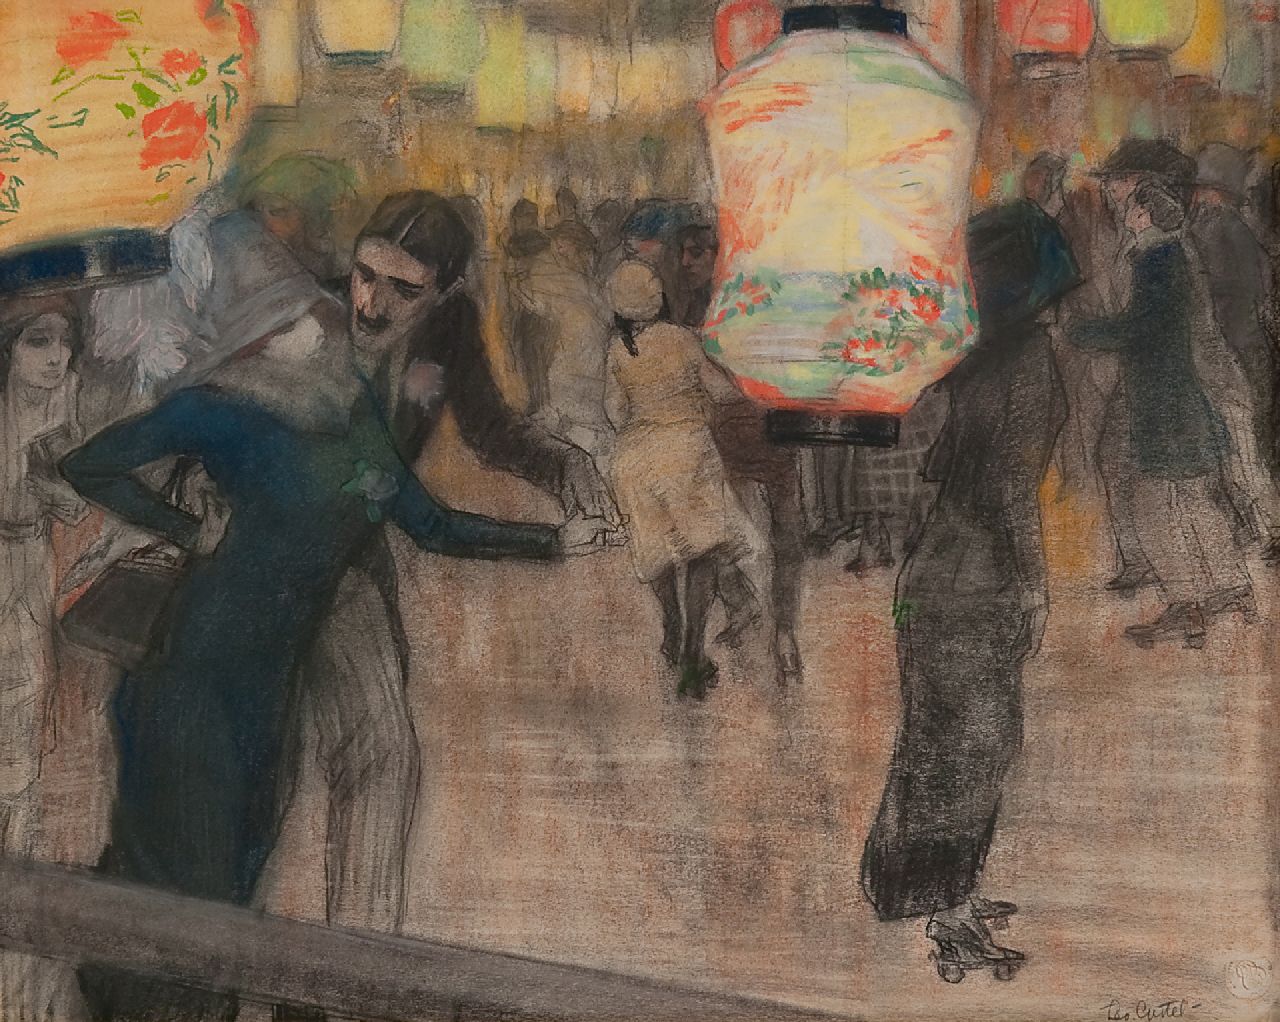 Gestel L.  | Leendert 'Leo' Gestel | Watercolours and drawings offered for sale | A roller skating rink with Japanese lanterns, black chalk and pastel on paper 41.5 x 52.0 cm, signed l.r. and painted ca. 1910-1911